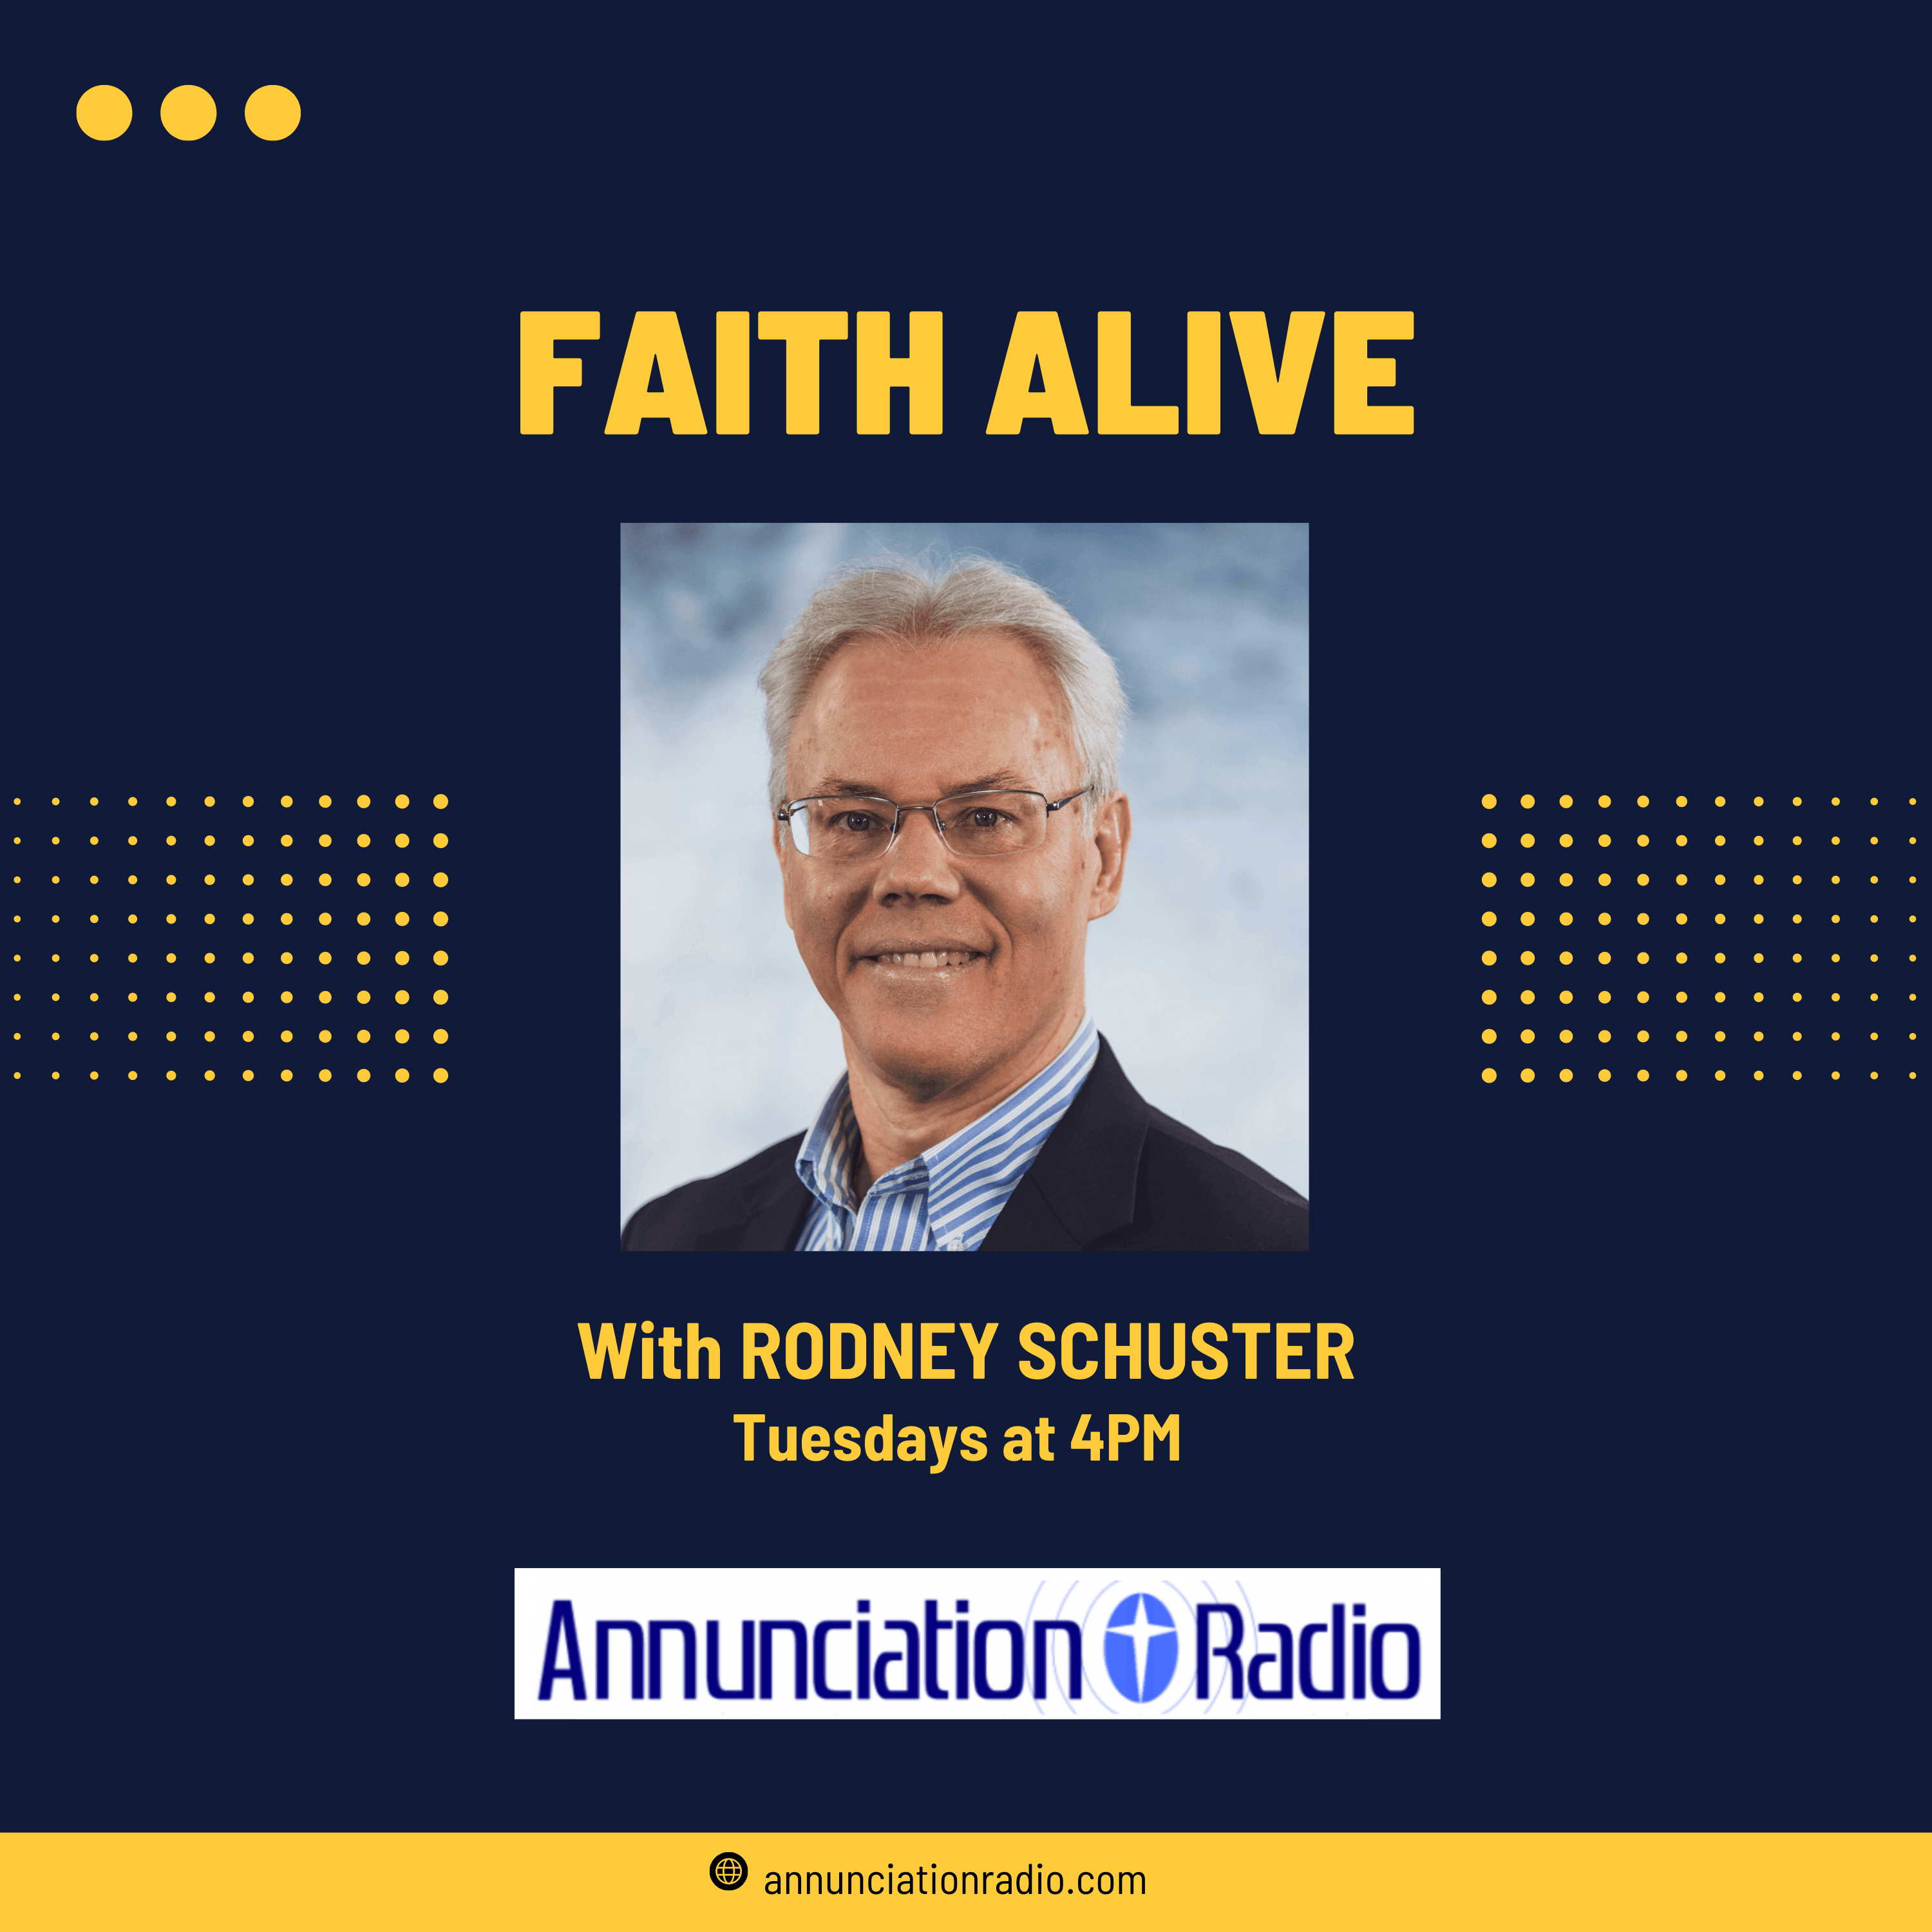 Listen on demand to archived "Faith Alive" programs on Annunciation Radio's mobile app or on their website at https://www.annunciationradio.com/faith-alive